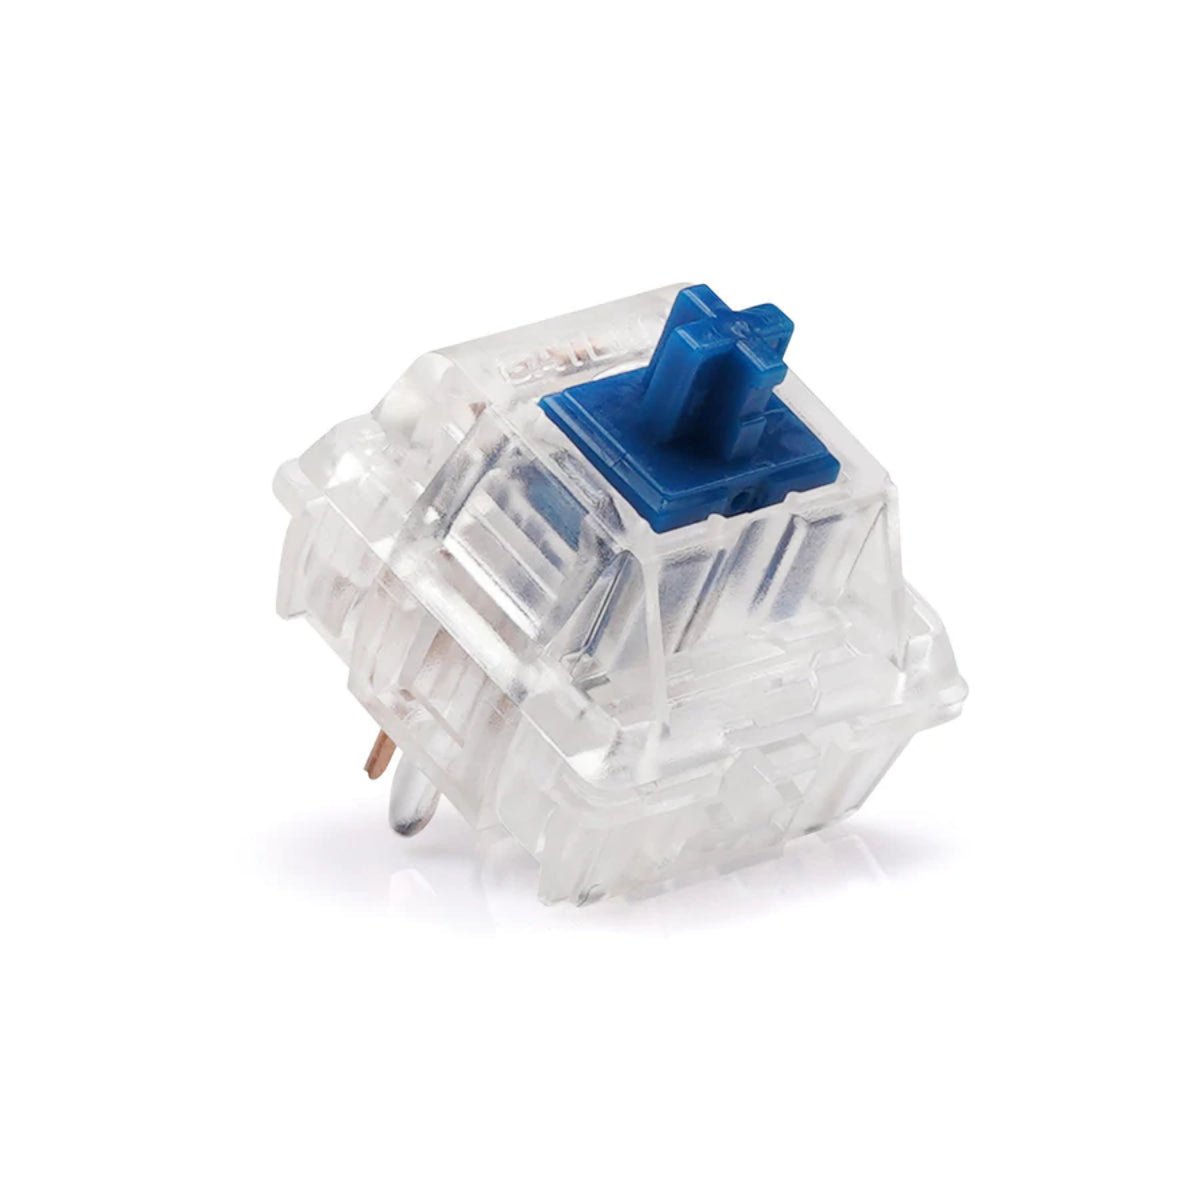 KBD Fans Zeal V2 Tactile Switches 67g - Zilents - Store 974 | ستور ٩٧٤